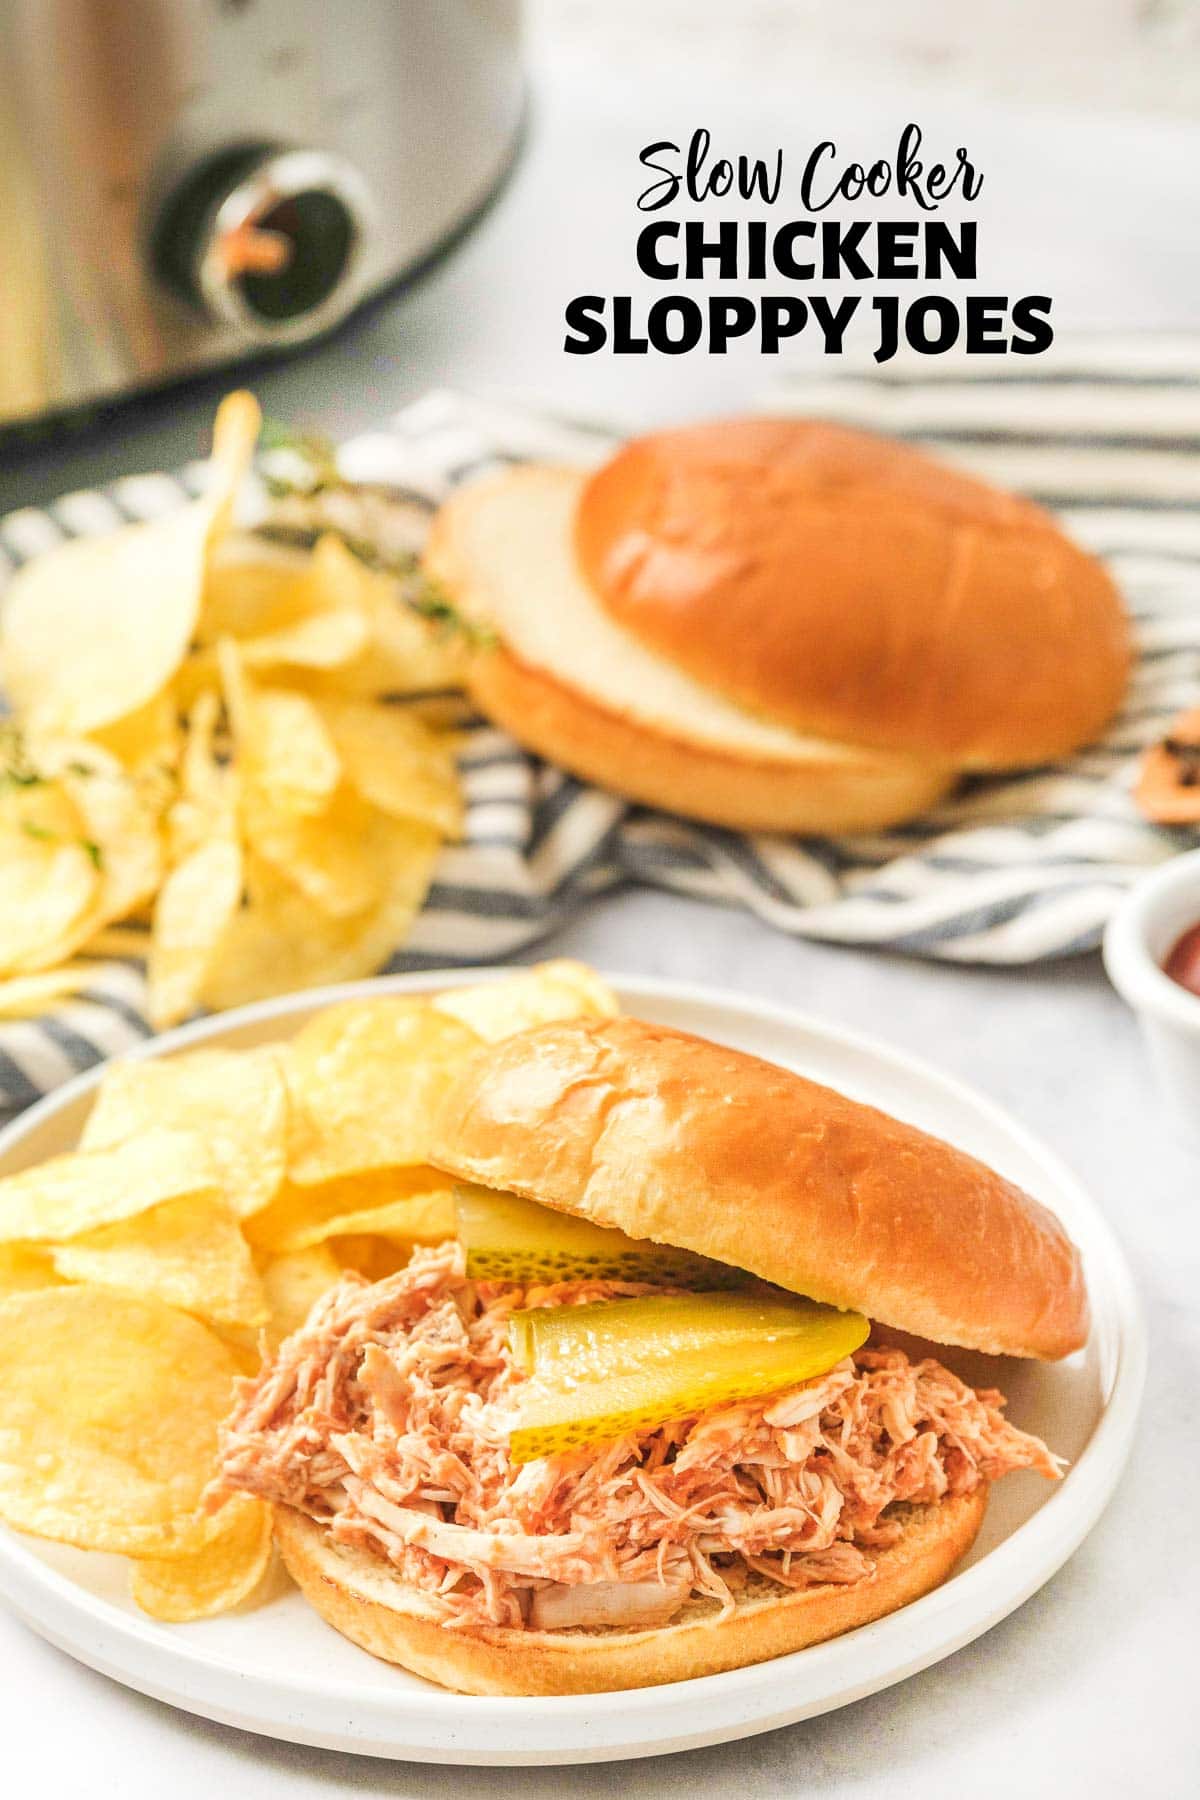 Slow Cooker Chicken Sloppy Joes with text overlay.